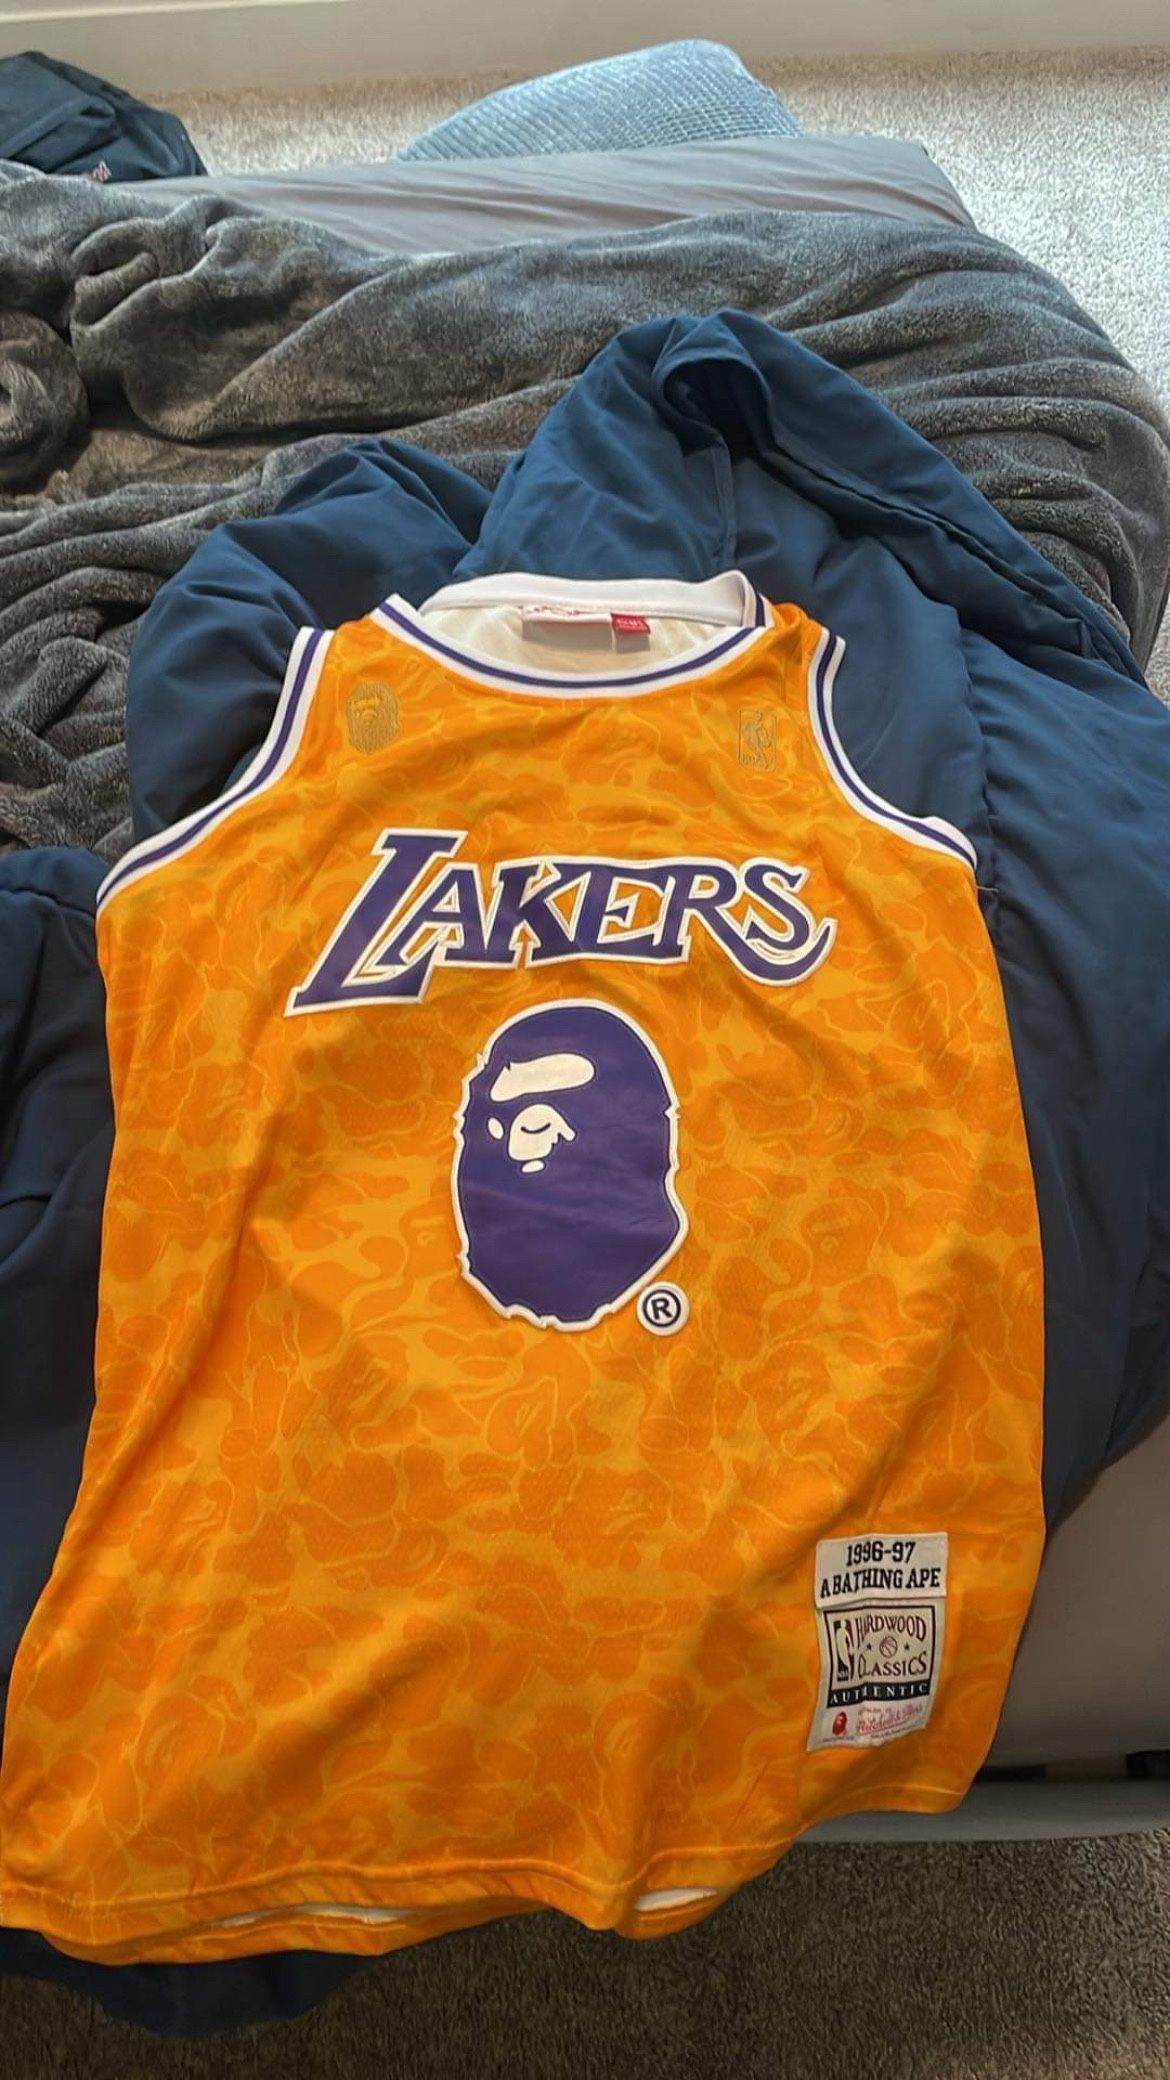 Bape Lakers Jersey (From Bape Store In Japan)